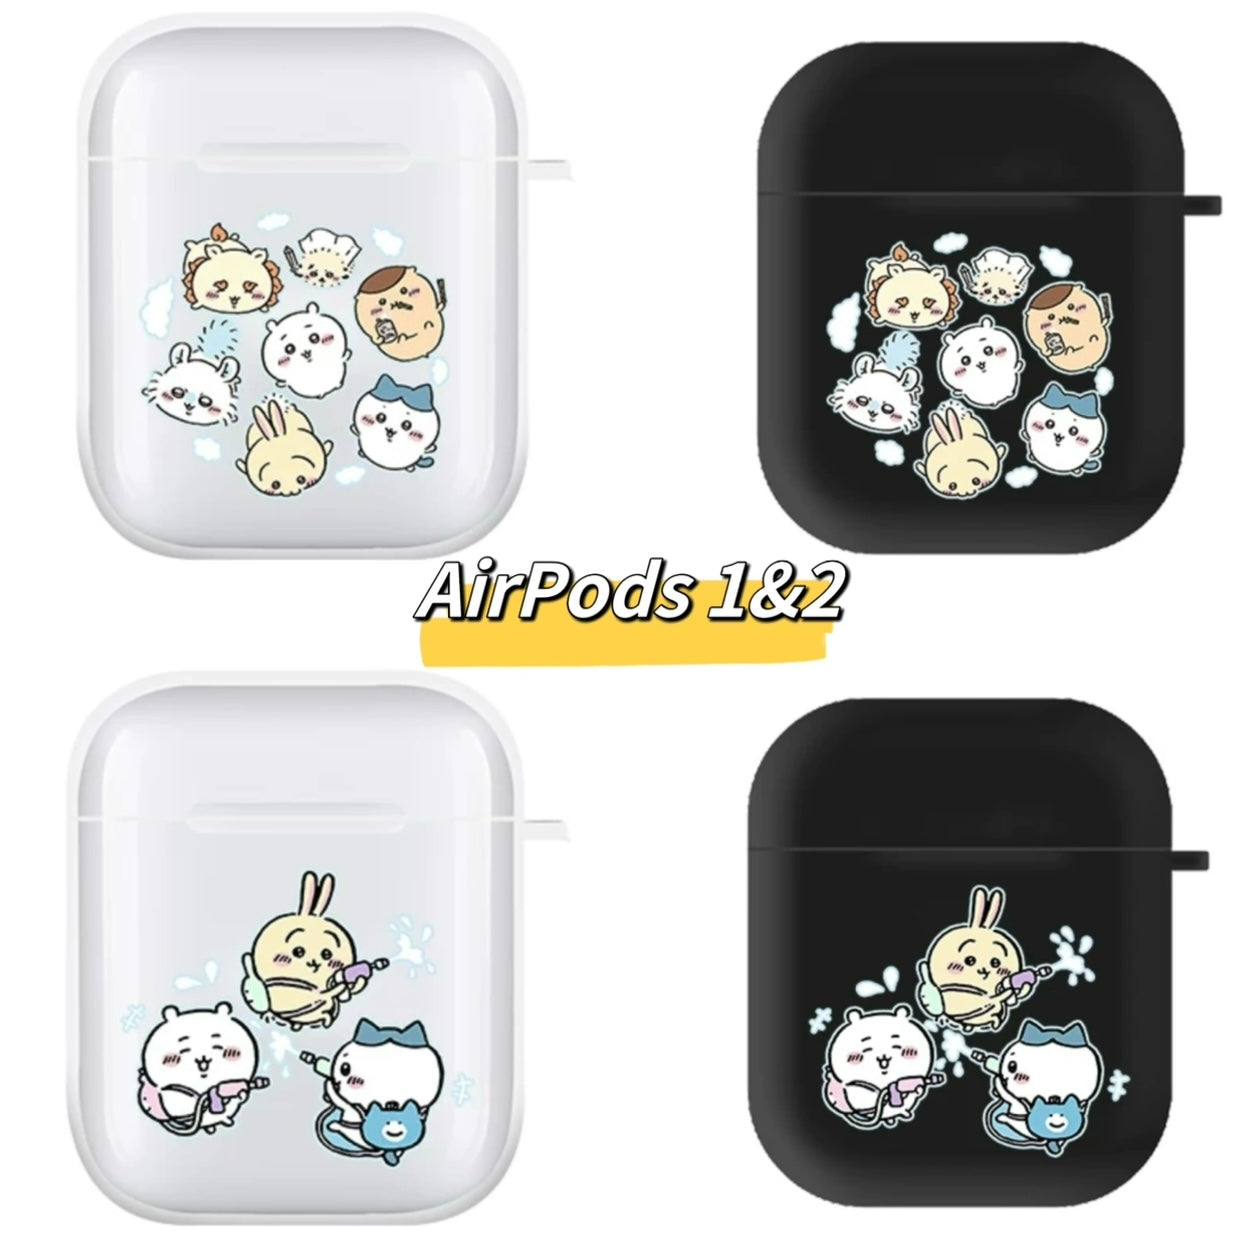 Japanese Cartoon ChiiKawa | Falling & Play Water AirPods AirPodsPro AirPods3 Case - Clear Black